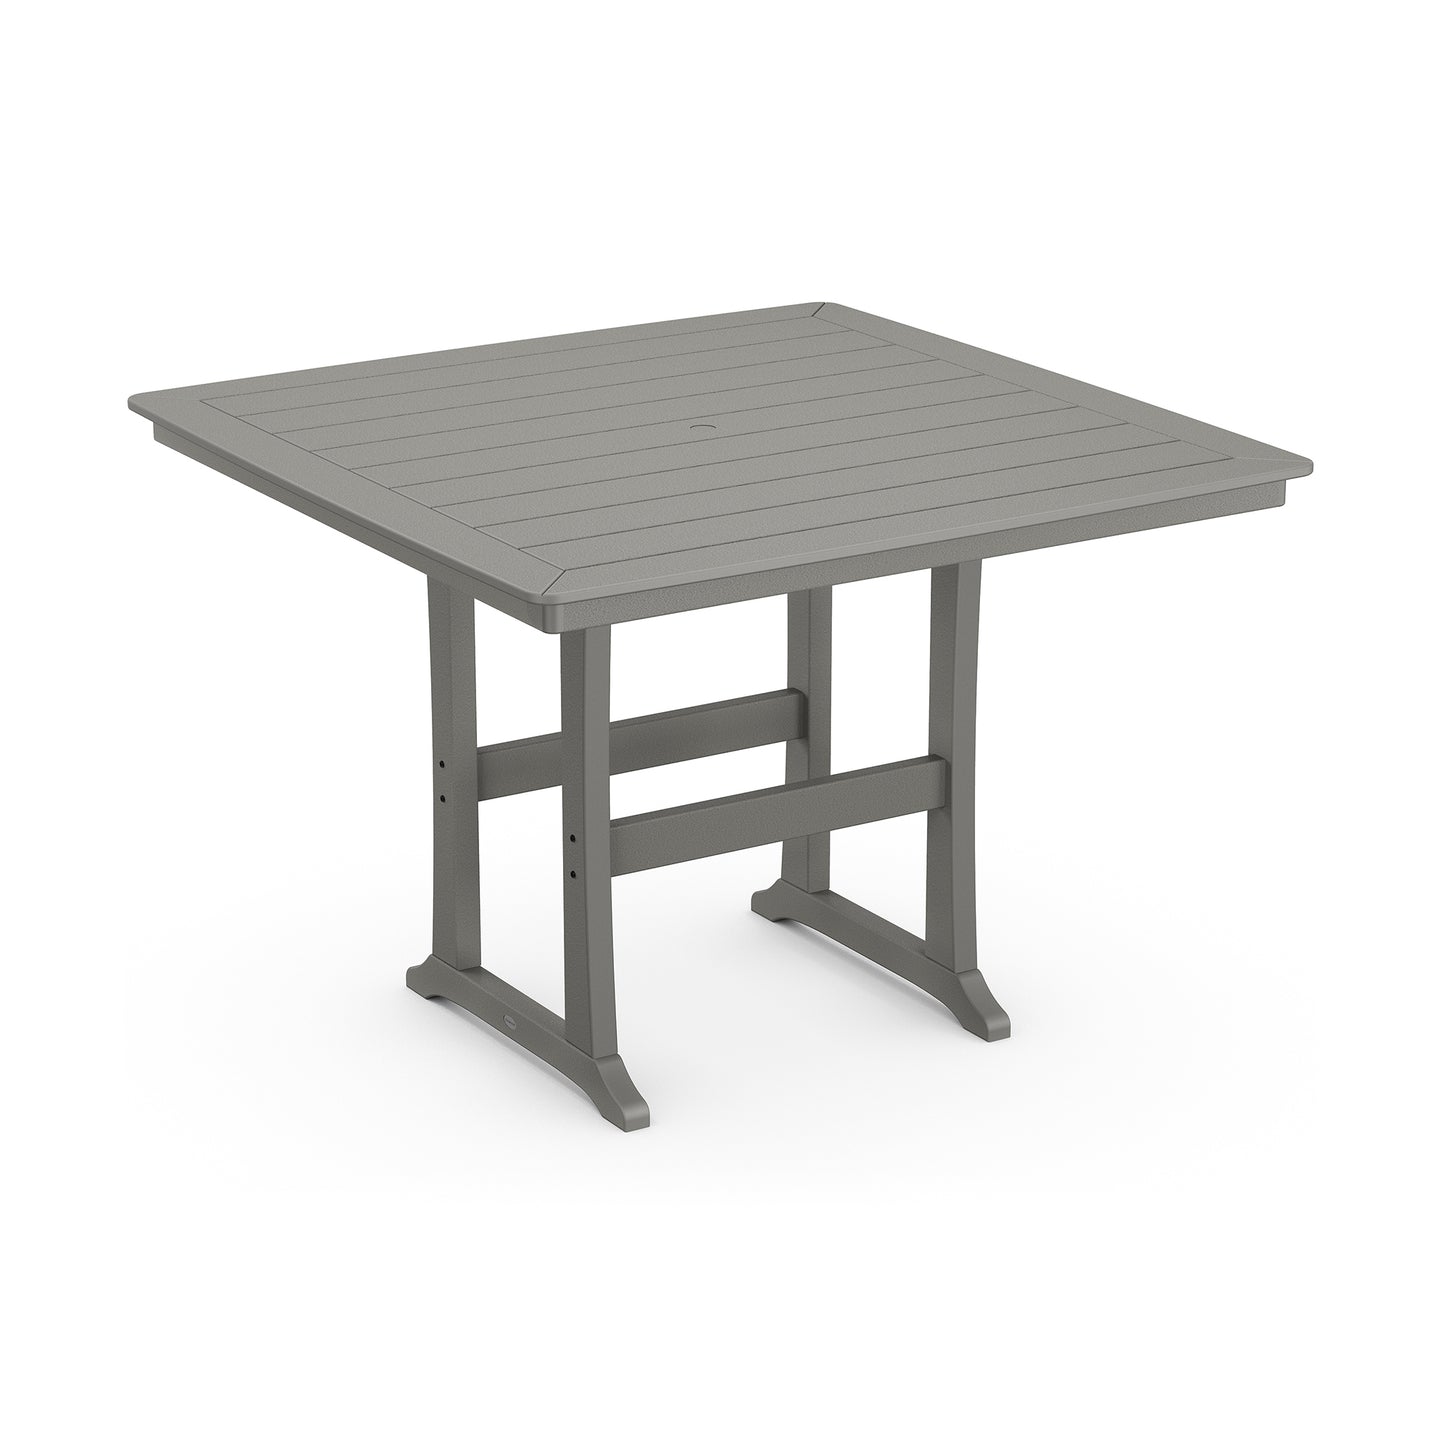 A square, gray, POLYWOOD® Nautical Trestle 59" Bar Table with slatted top and sturdy legs, isolated on a white background.